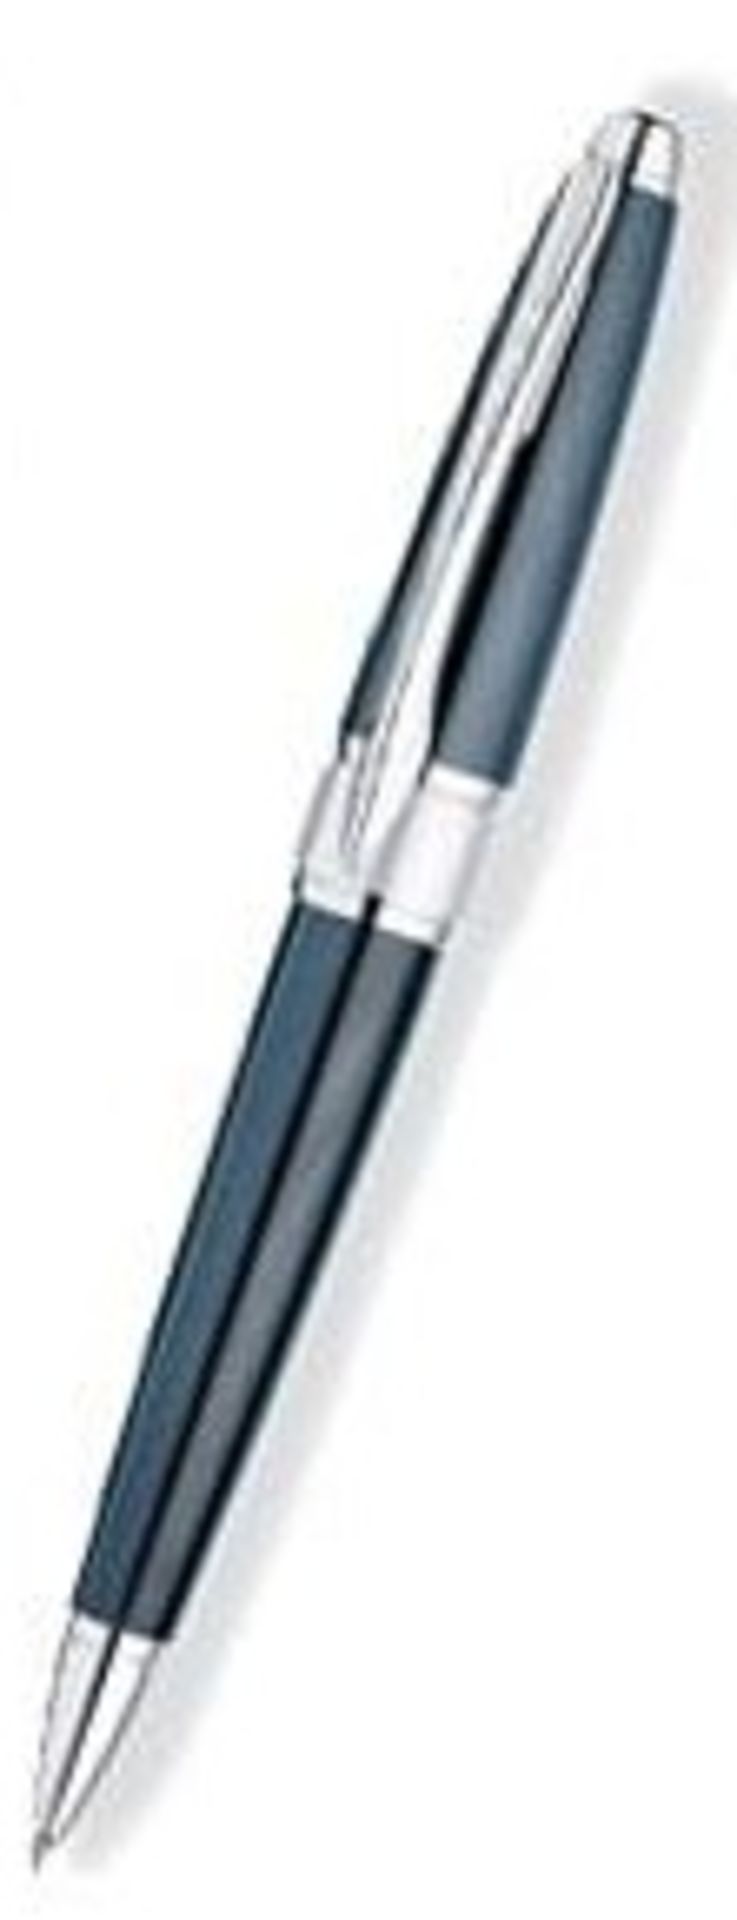 + VAT Brand New Cross Apogee Black Lacquer Rollerball Pen With Chrome Trim In Presentation Box - WH